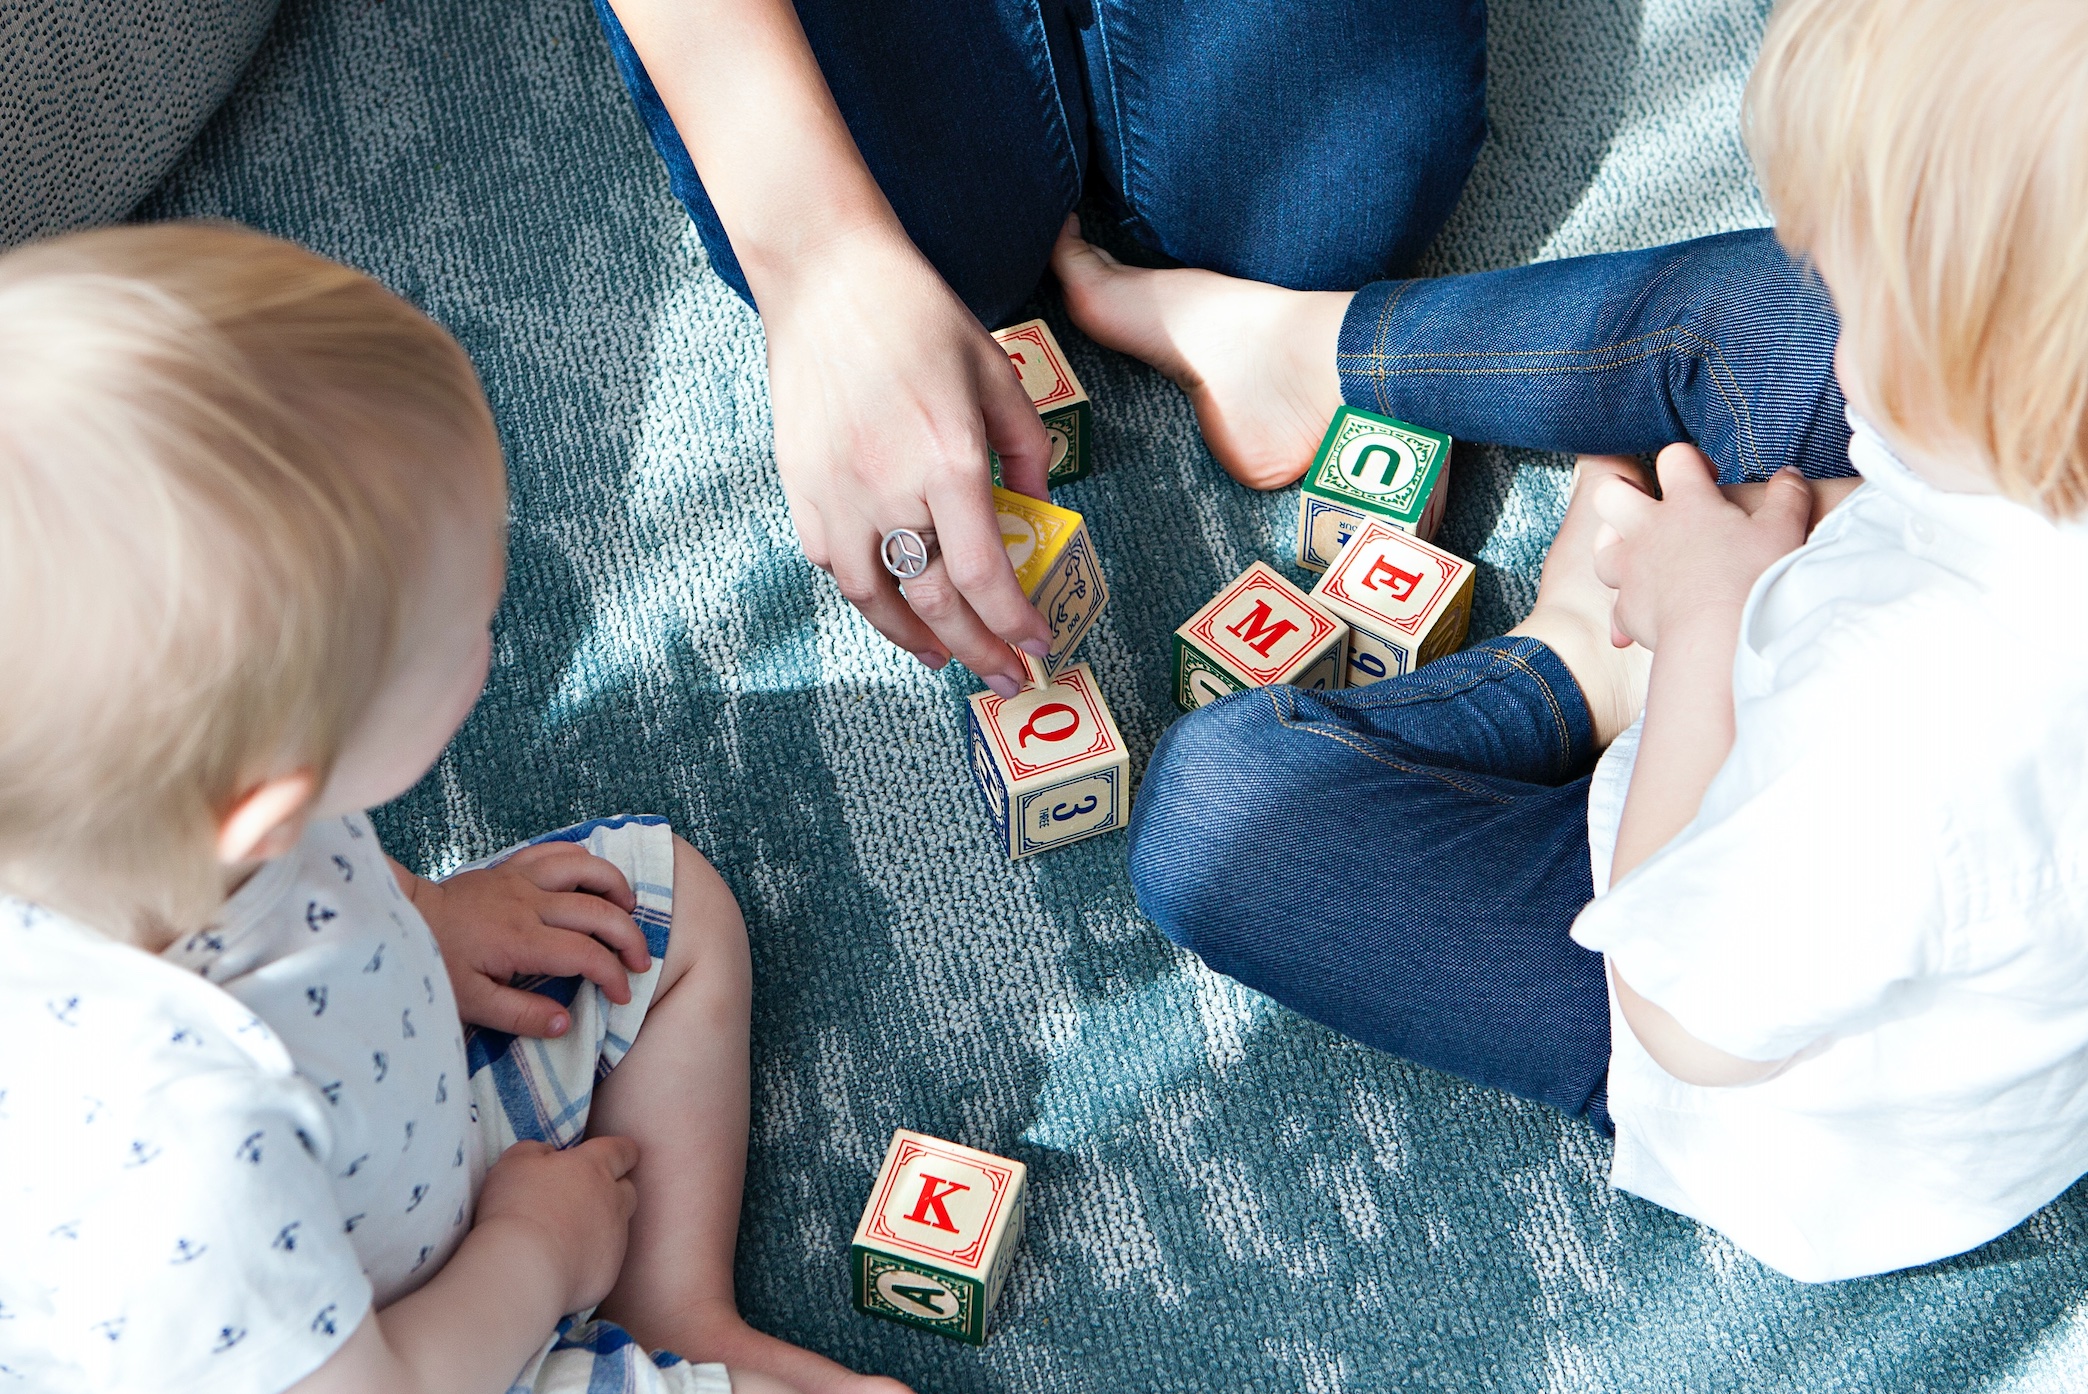 Woman and two little children playing with alphabet blocks on the floor; image by Marisa Howenstine, via Unsplash.com.